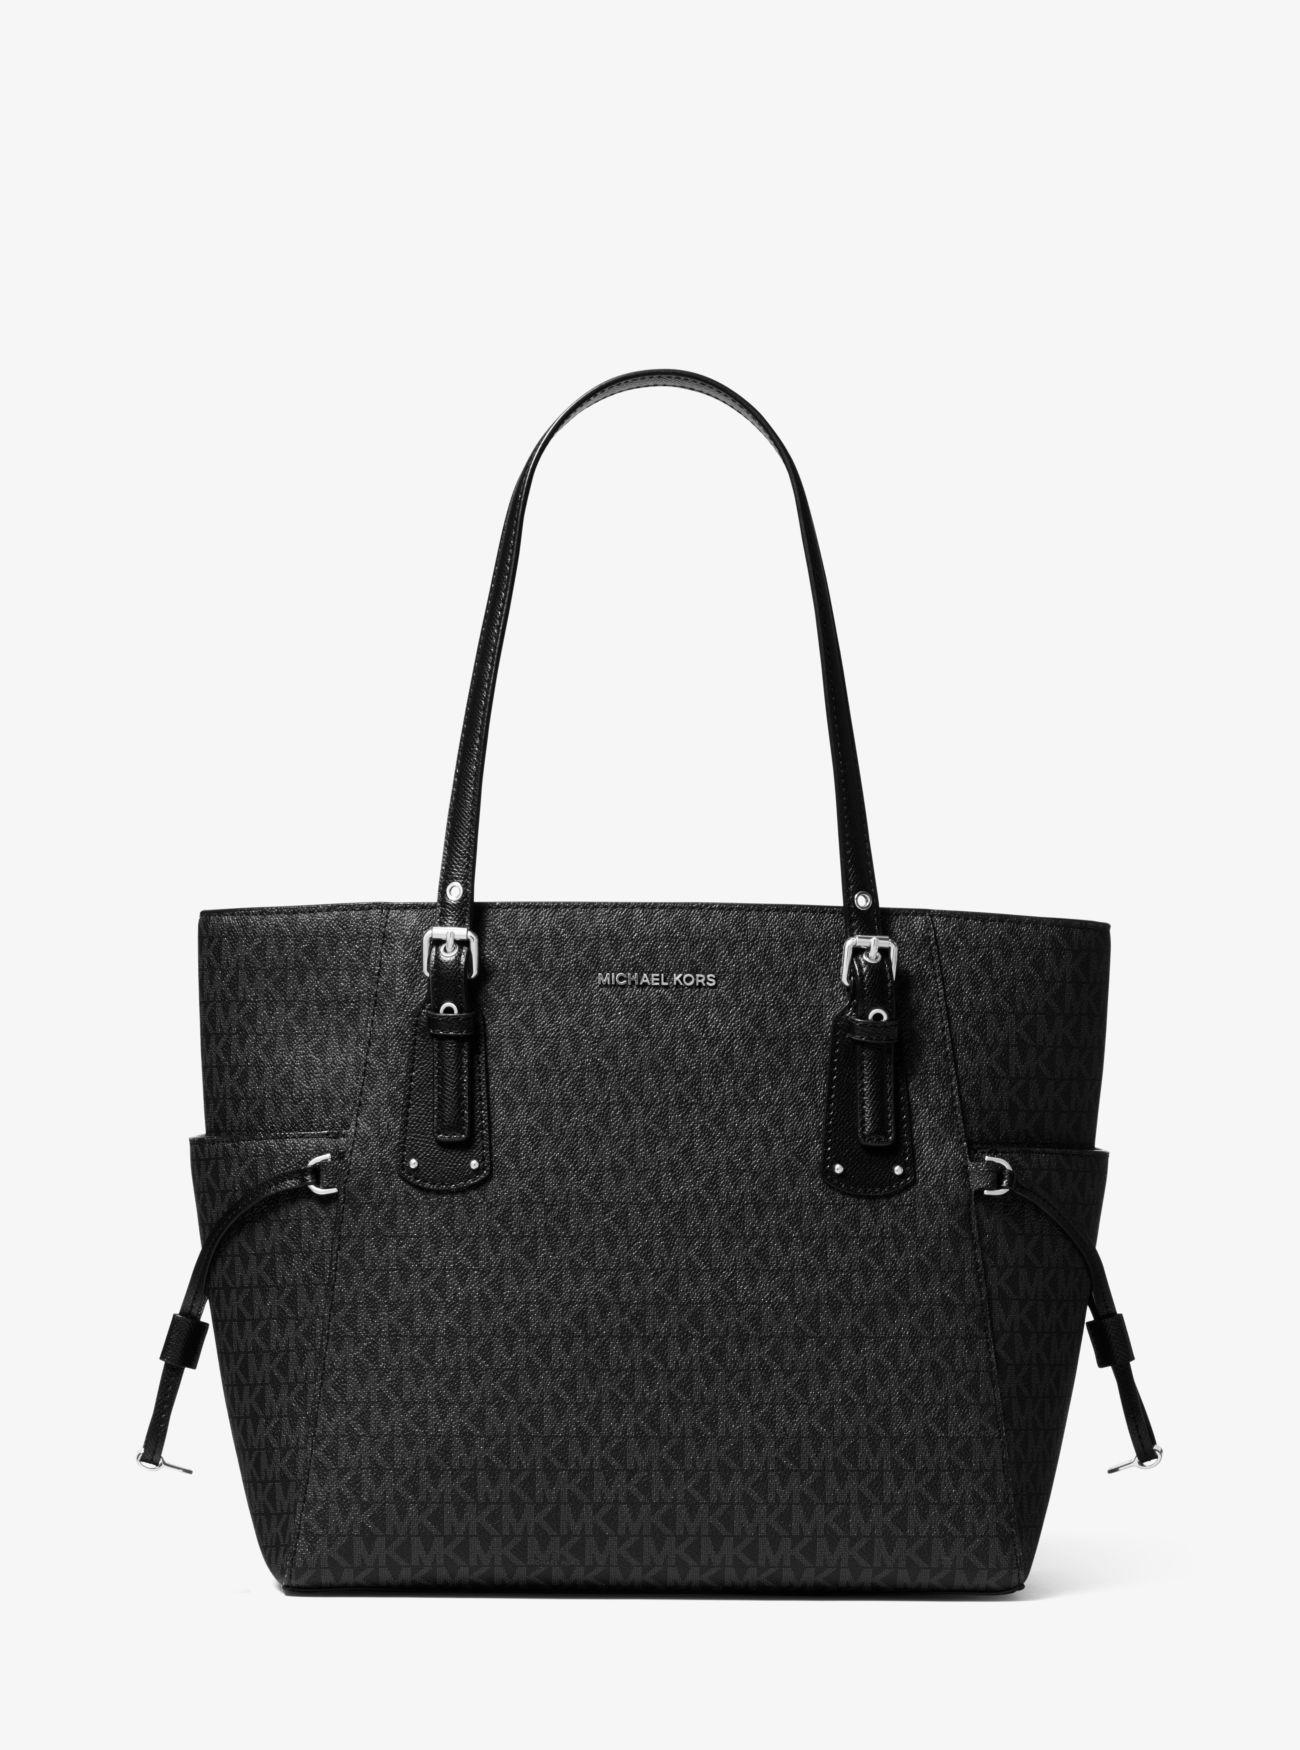 Michael Kors Voyager Small Logo Tote Bag in Black - Save 26% - Lyst